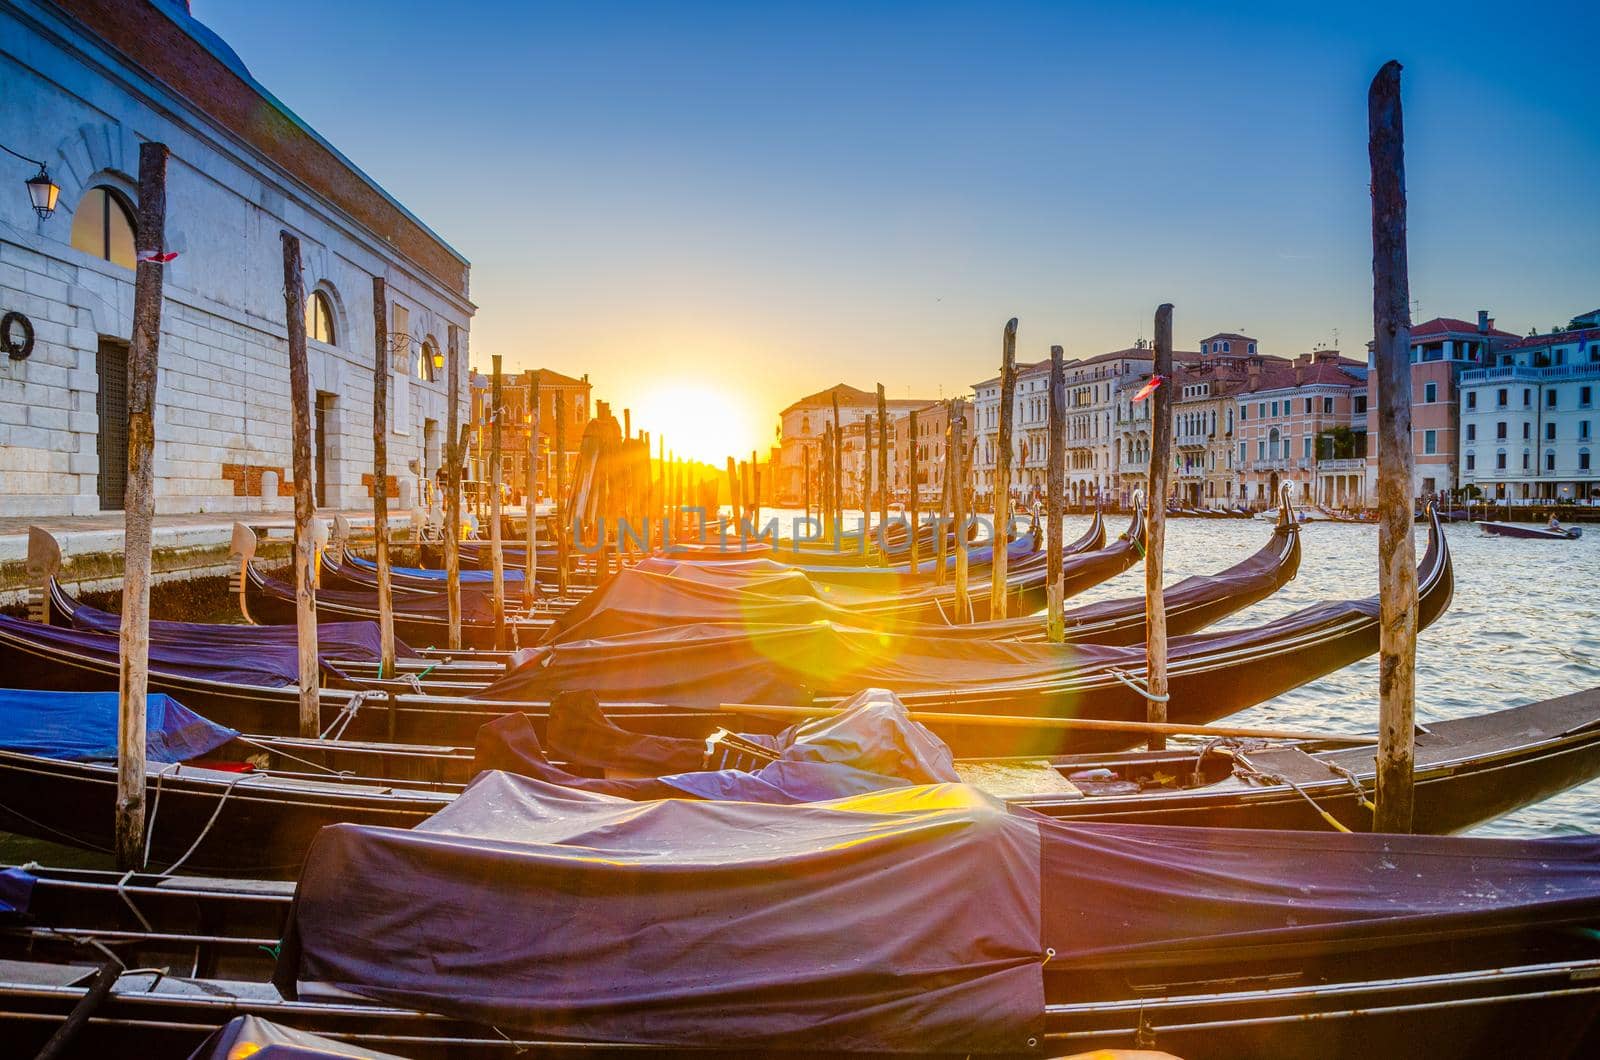 Gondolas moored docked on pier of Grand Canal waterway in Venice. Baroque style buildings along Canal Grande background. View against sun. Amazing Venice cityscape at sunset. Veneto Region, Italy